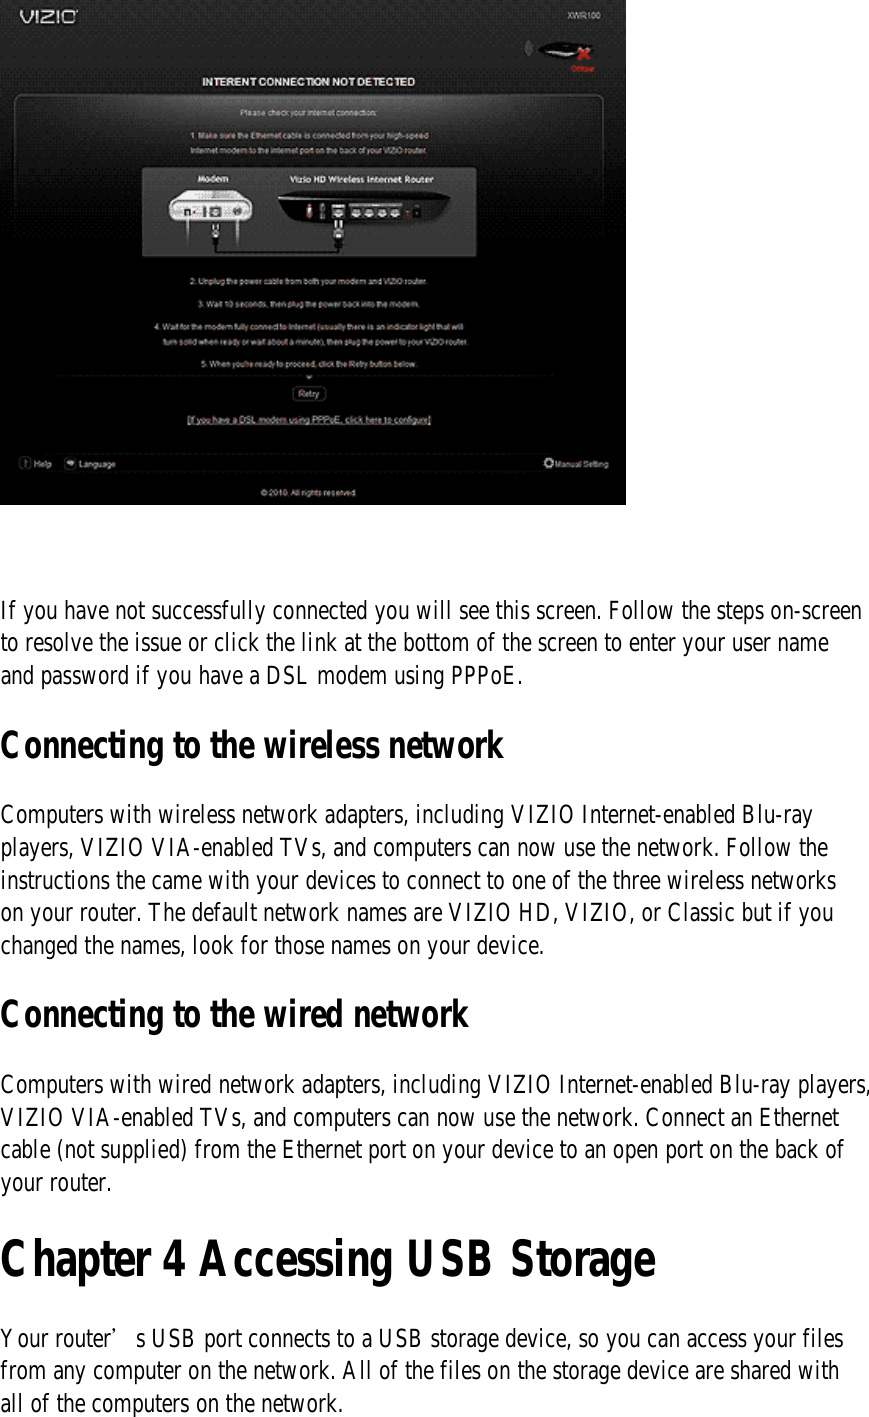    If you have not successfully connected you will see this screen. Follow the steps on-screen to resolve the issue or click the link at the bottom of the screen to enter your user name and password if you have a DSL modem using PPPoE. Connecting to the wireless network Computers with wireless network adapters, including VIZIO Internet-enabled Blu-ray players, VIZIO VIA-enabled TVs, and computers can now use the network. Follow the instructions the came with your devices to connect to one of the three wireless networks on your router. The default network names are VIZIO HD, VIZIO, or Classic but if you changed the names, look for those names on your device. Connecting to the wired network Computers with wired network adapters, including VIZIO Internet-enabled Blu-ray players, VIZIO VIA-enabled TVs, and computers can now use the network. Connect an Ethernet cable (not supplied) from the Ethernet port on your device to an open port on the back of your router. Chapter 4 Accessing USB Storage Your router’s USB port connects to a USB storage device, so you can access your files from any computer on the network. All of the files on the storage device are shared with all of the computers on the network. 